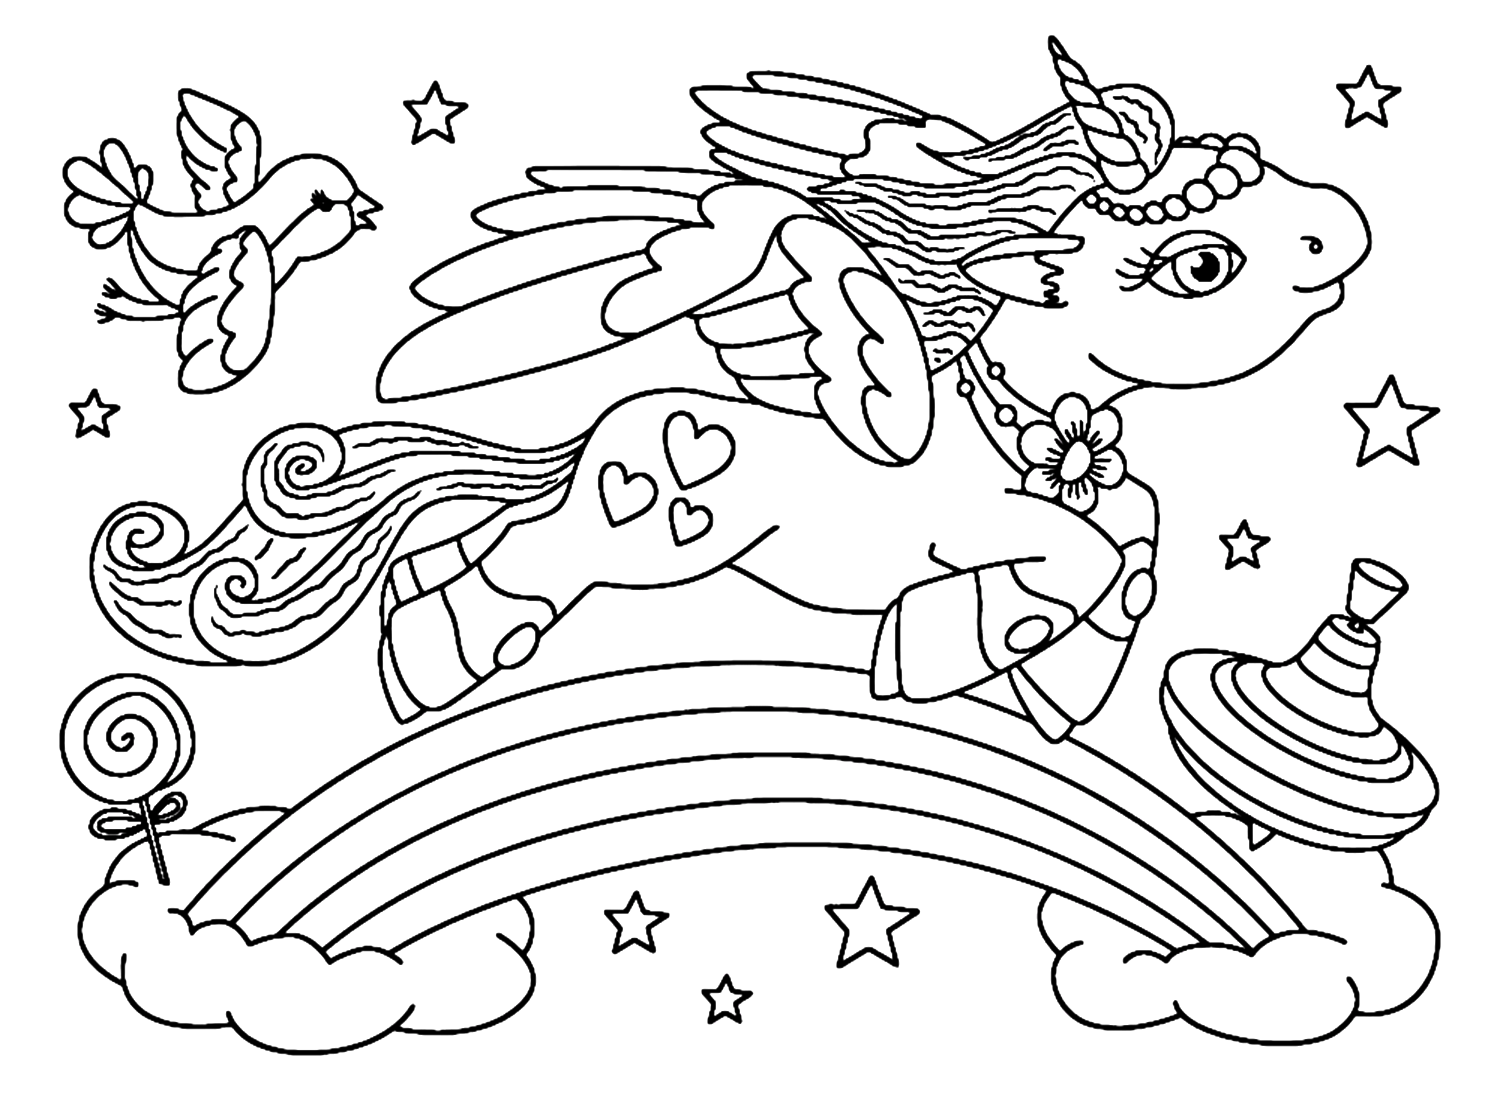 Unicorn Flying With A Bird Coloring Pages